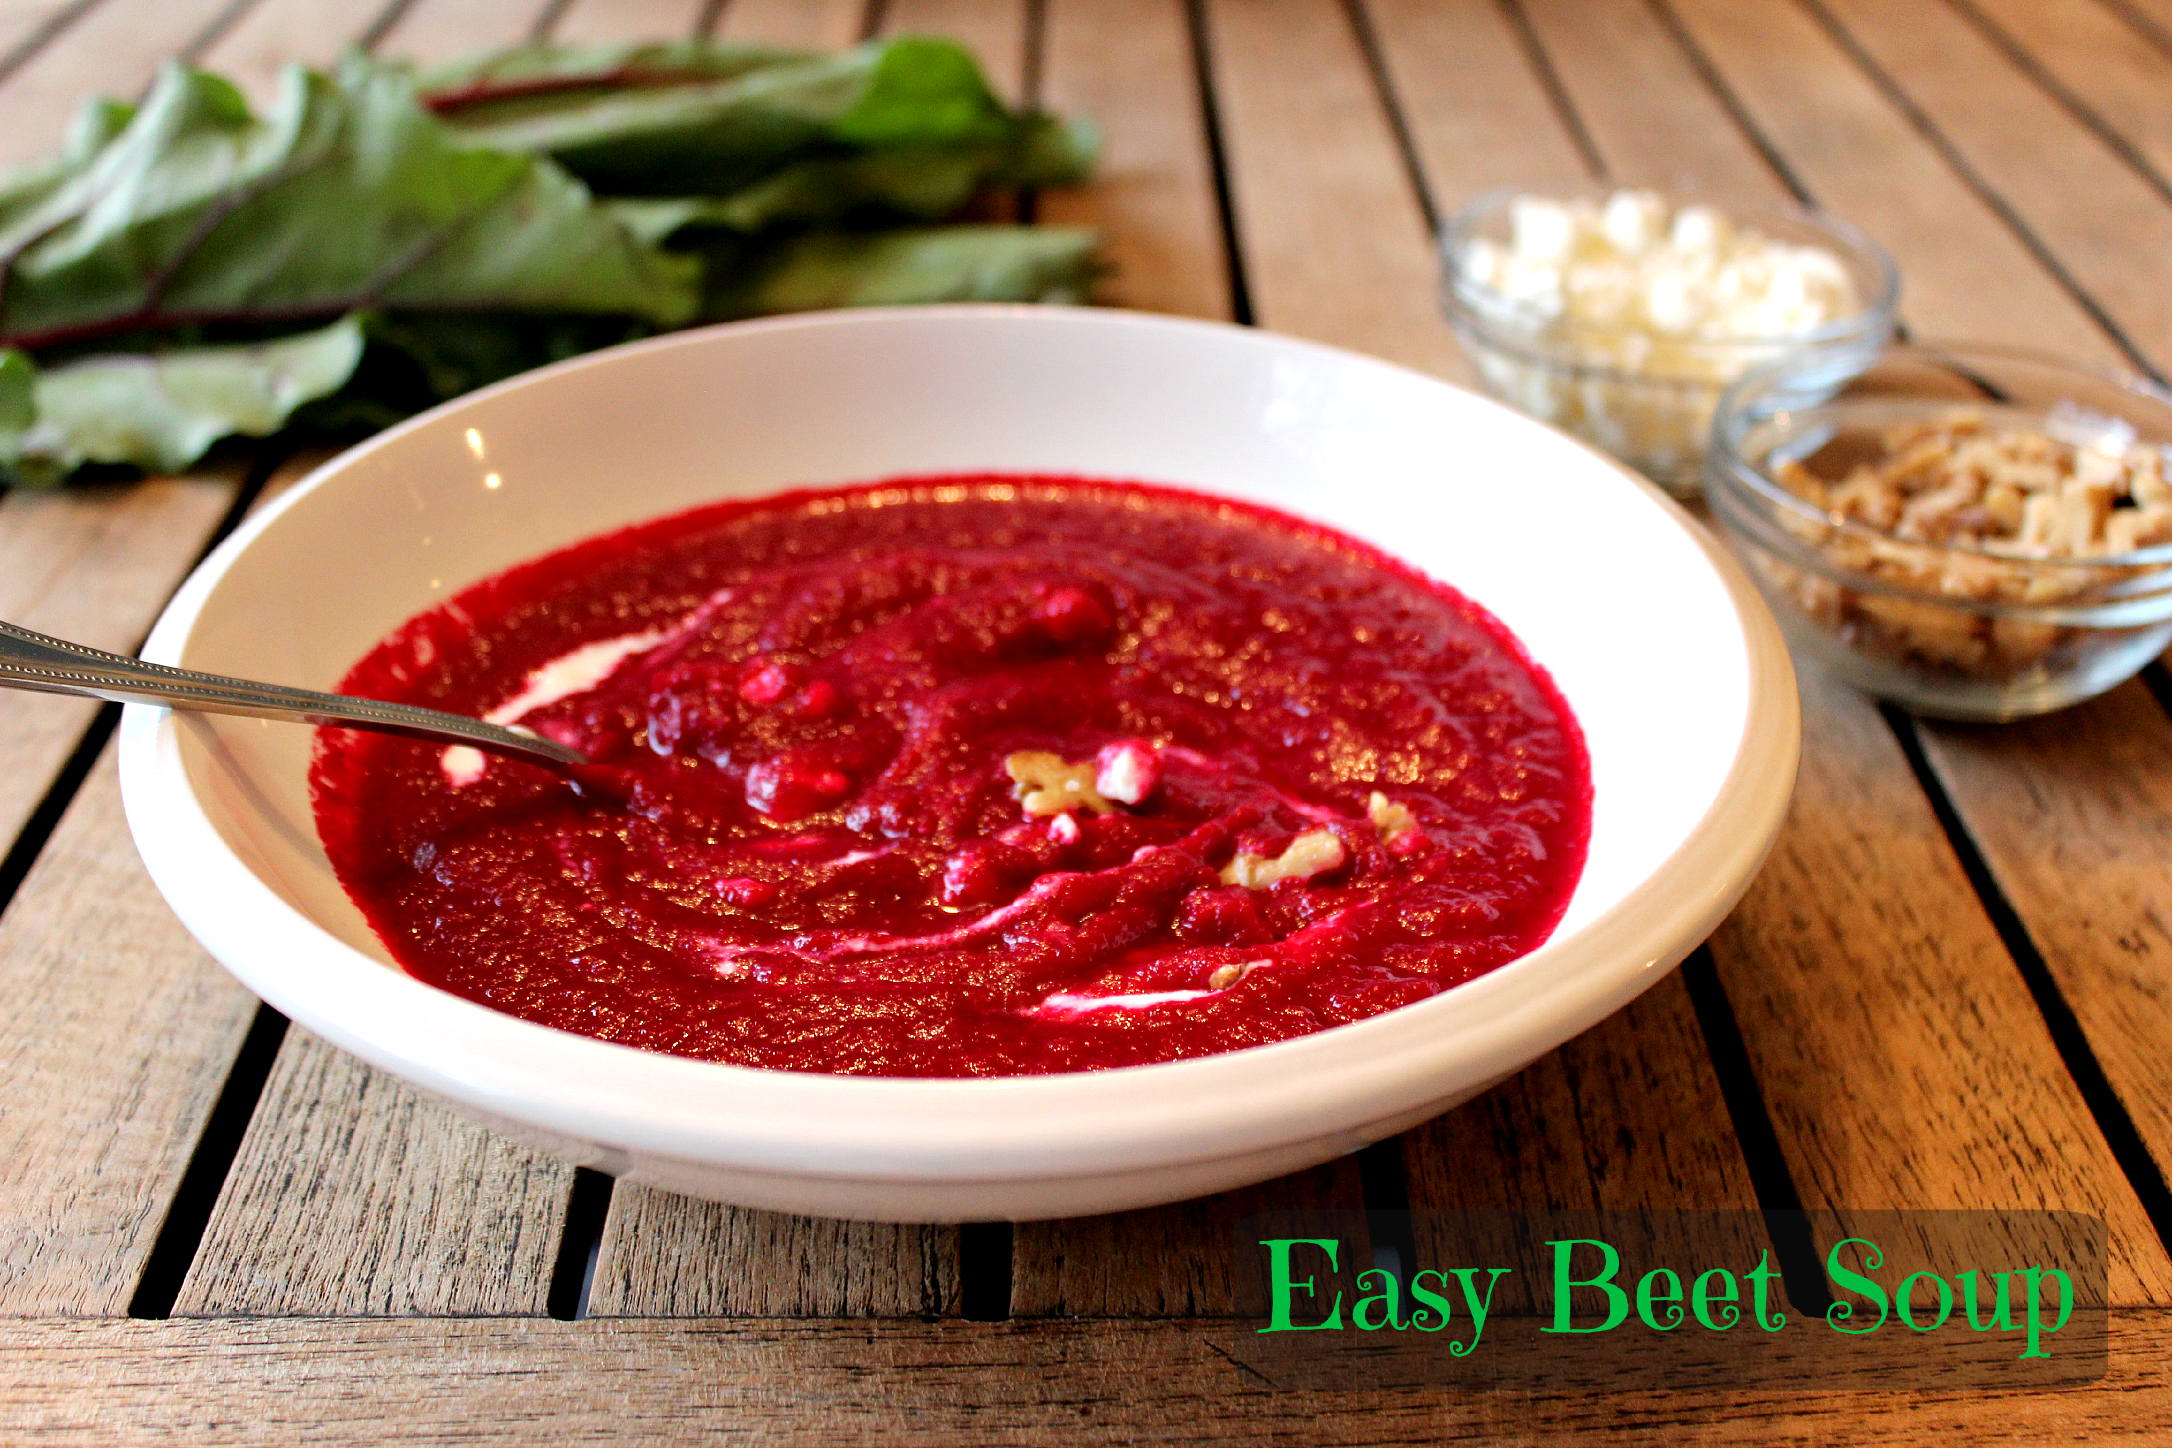 Easy Beet Soup- Easy to make, absolutely delicious, AND healthy!